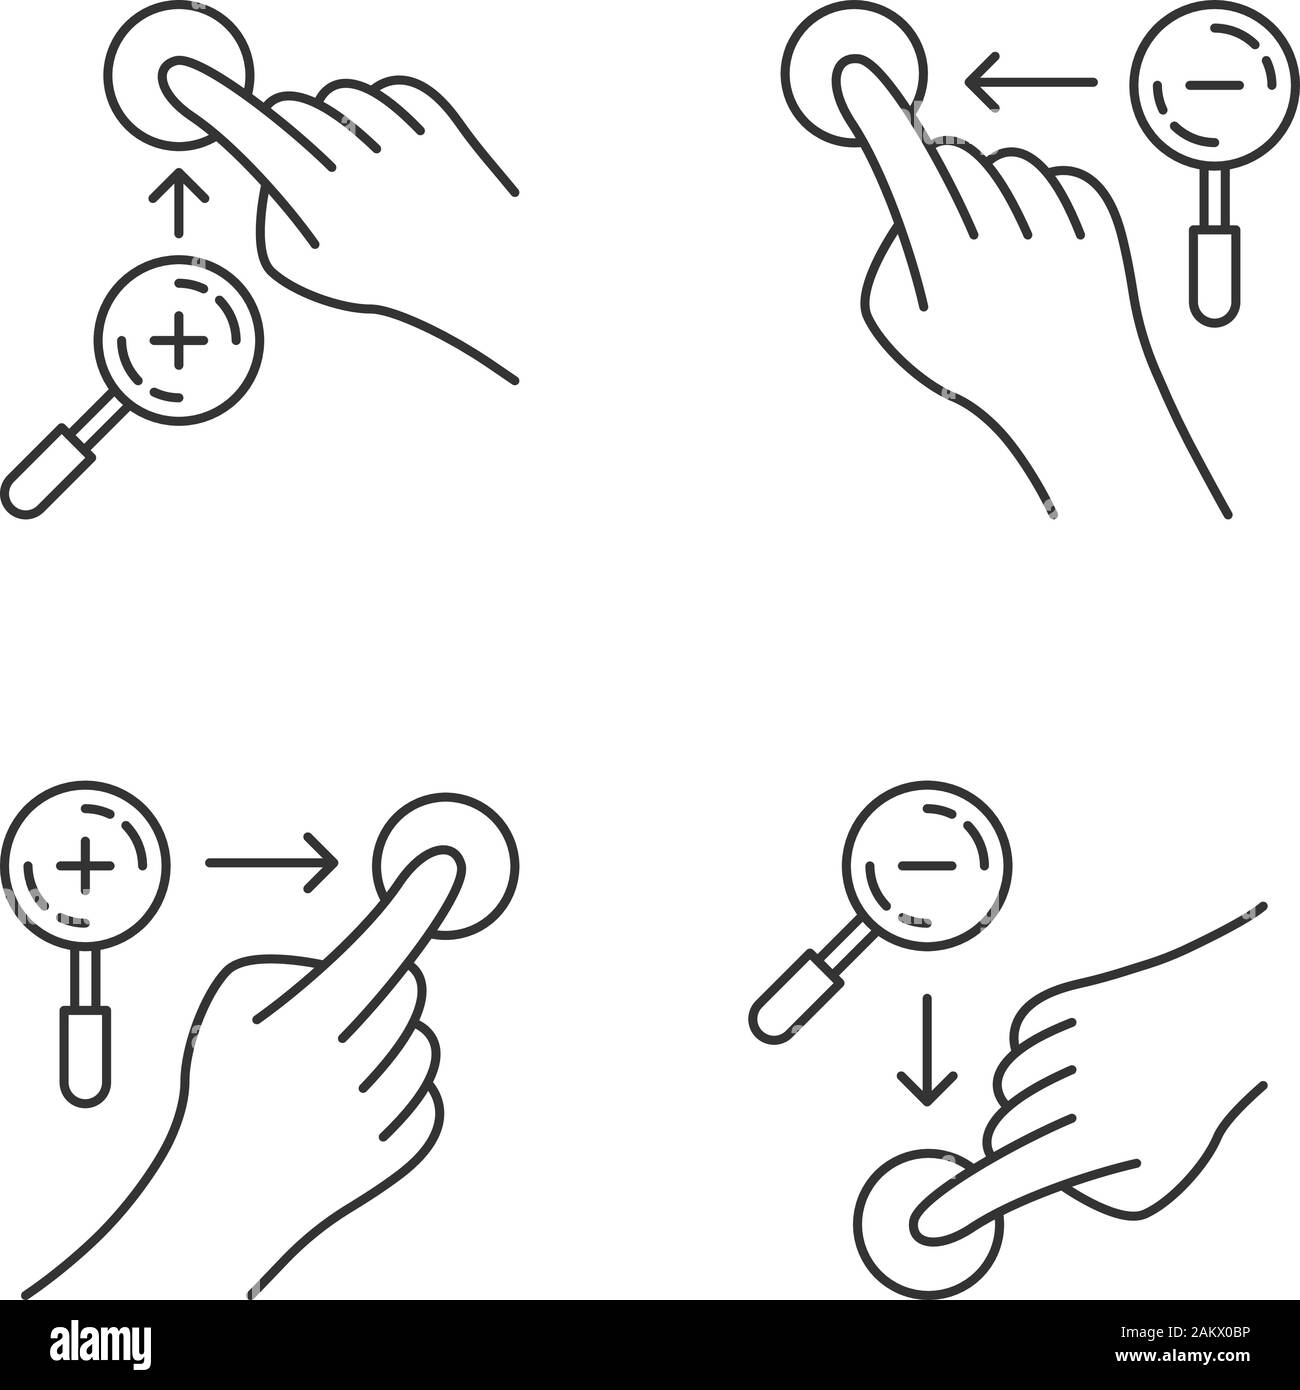 Touchscreen gestures linear icons set. Zoom in vertical, zoom out vertical gesturing. Zoom in horizontal, zoom out horizontal. Thin line contour symbo Stock Vector